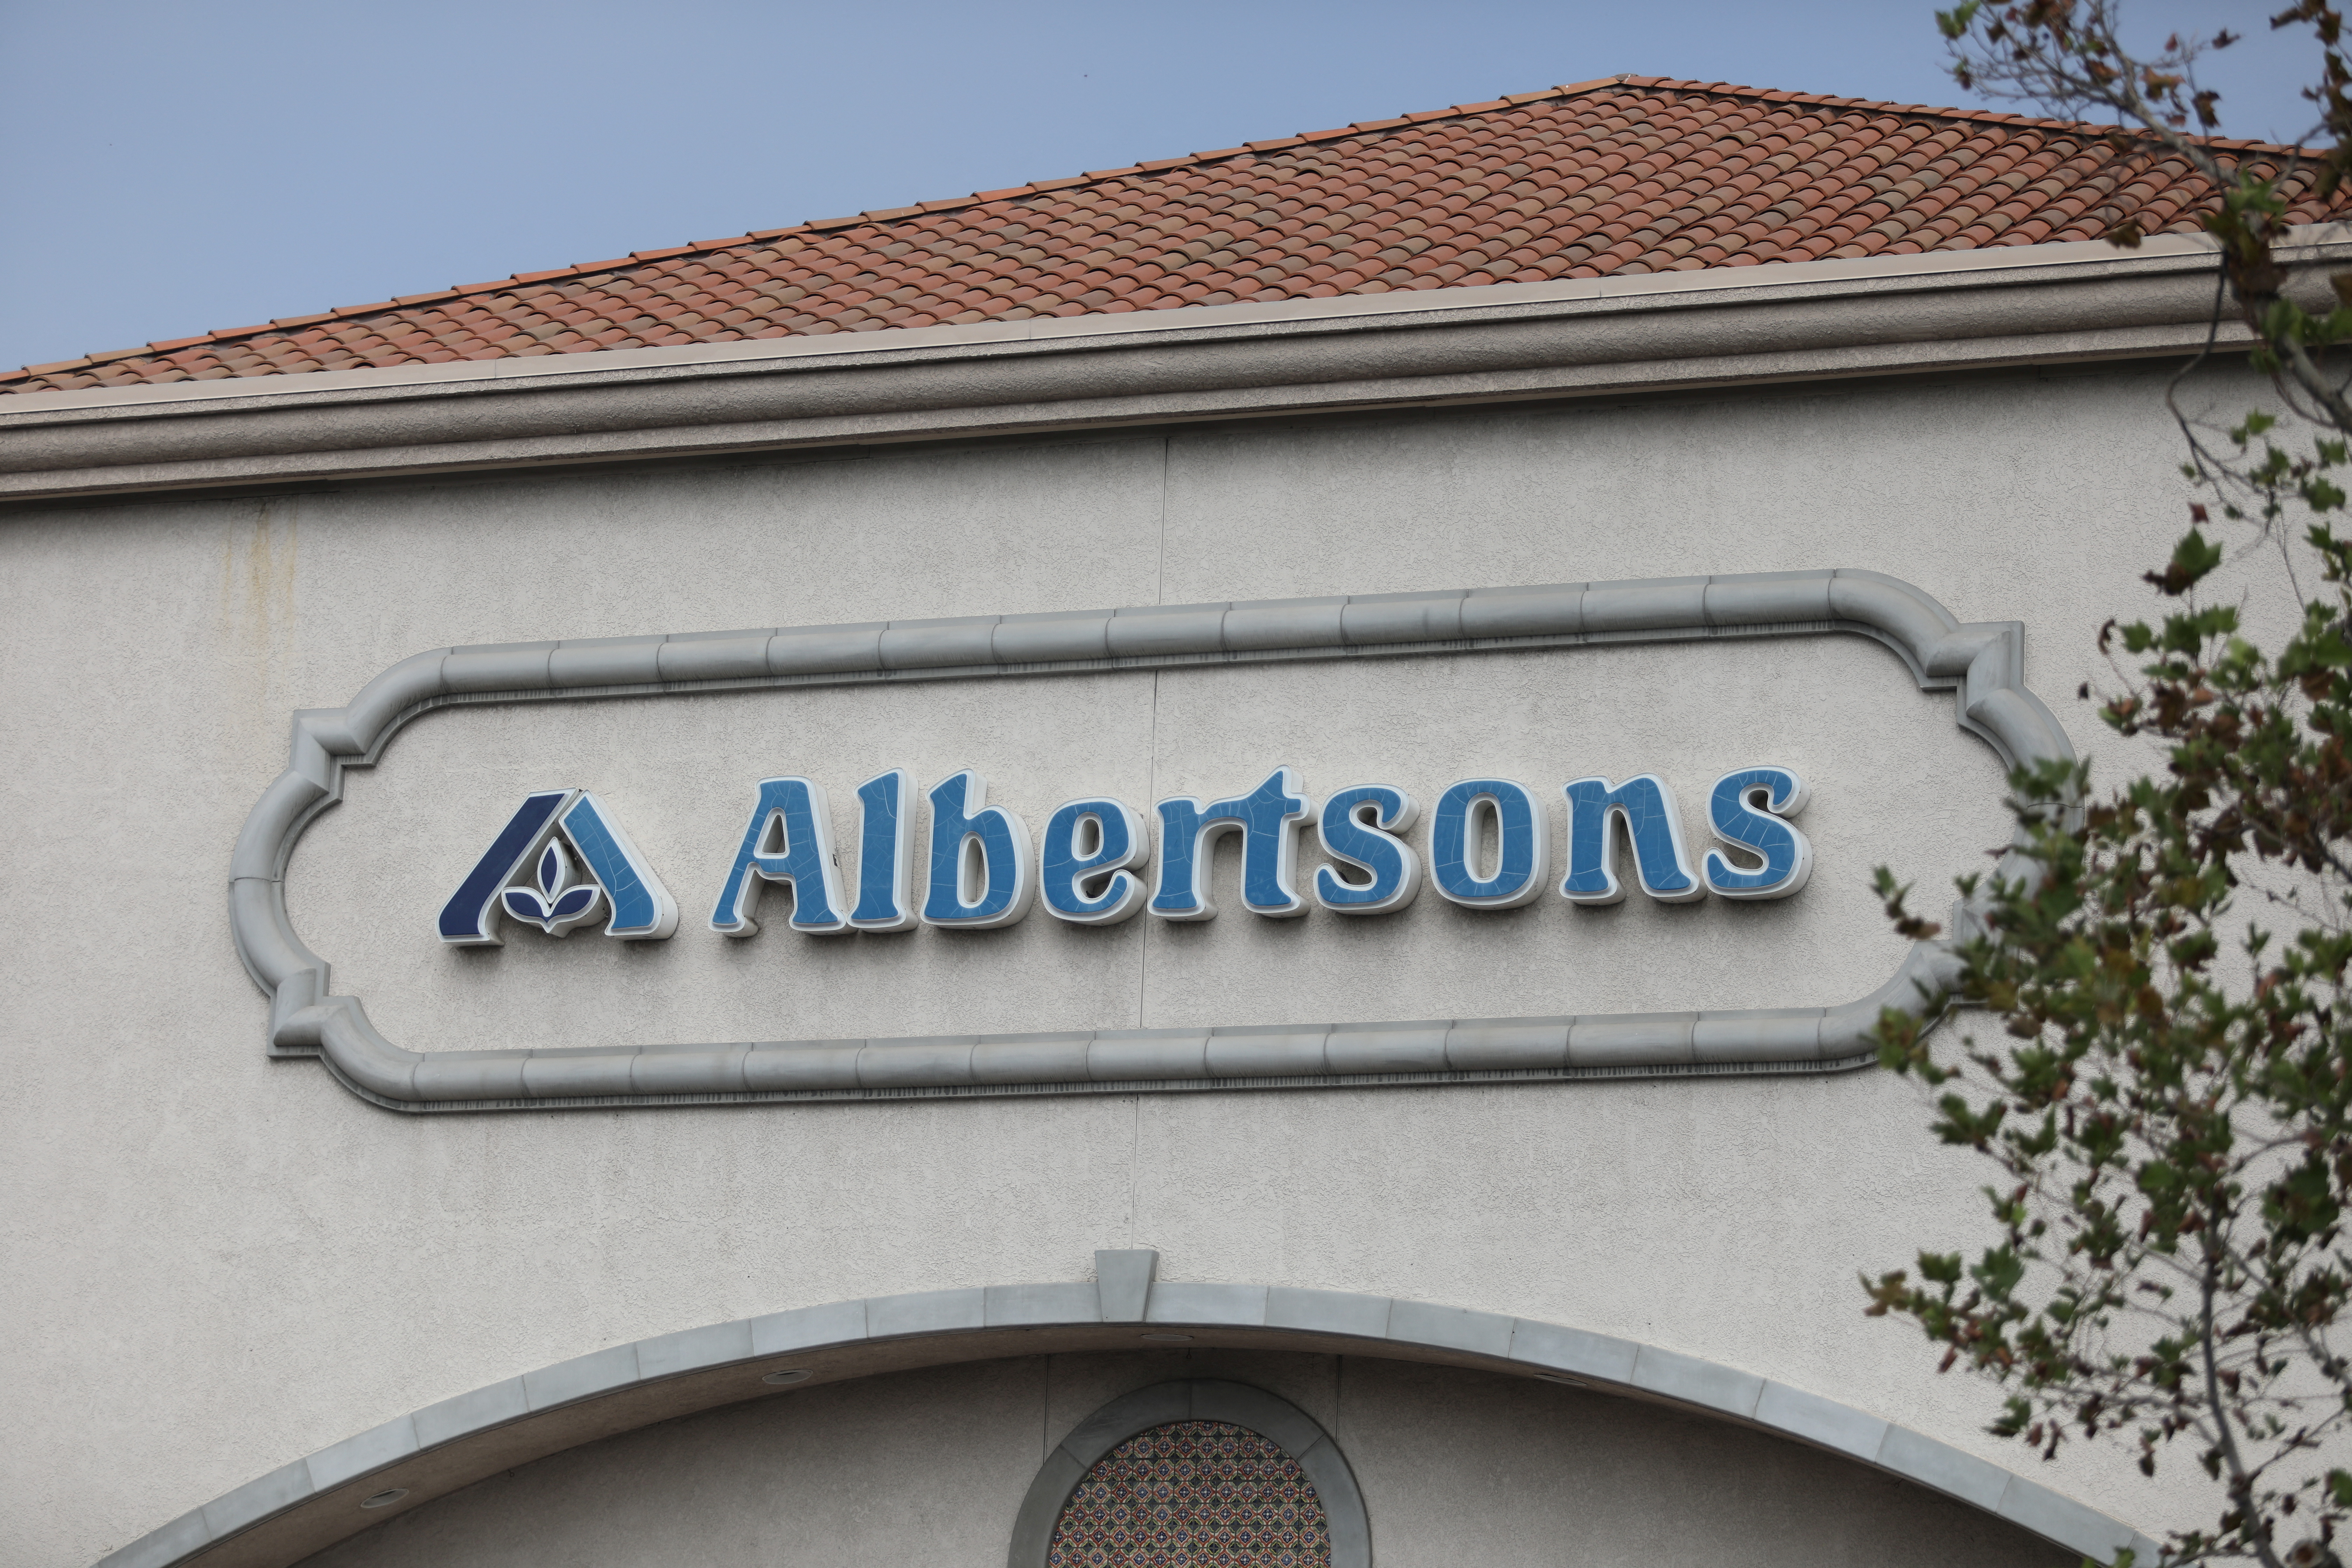 The Albertsons logo is seen on an Albertsons grocery store in Rancho Cucamonga